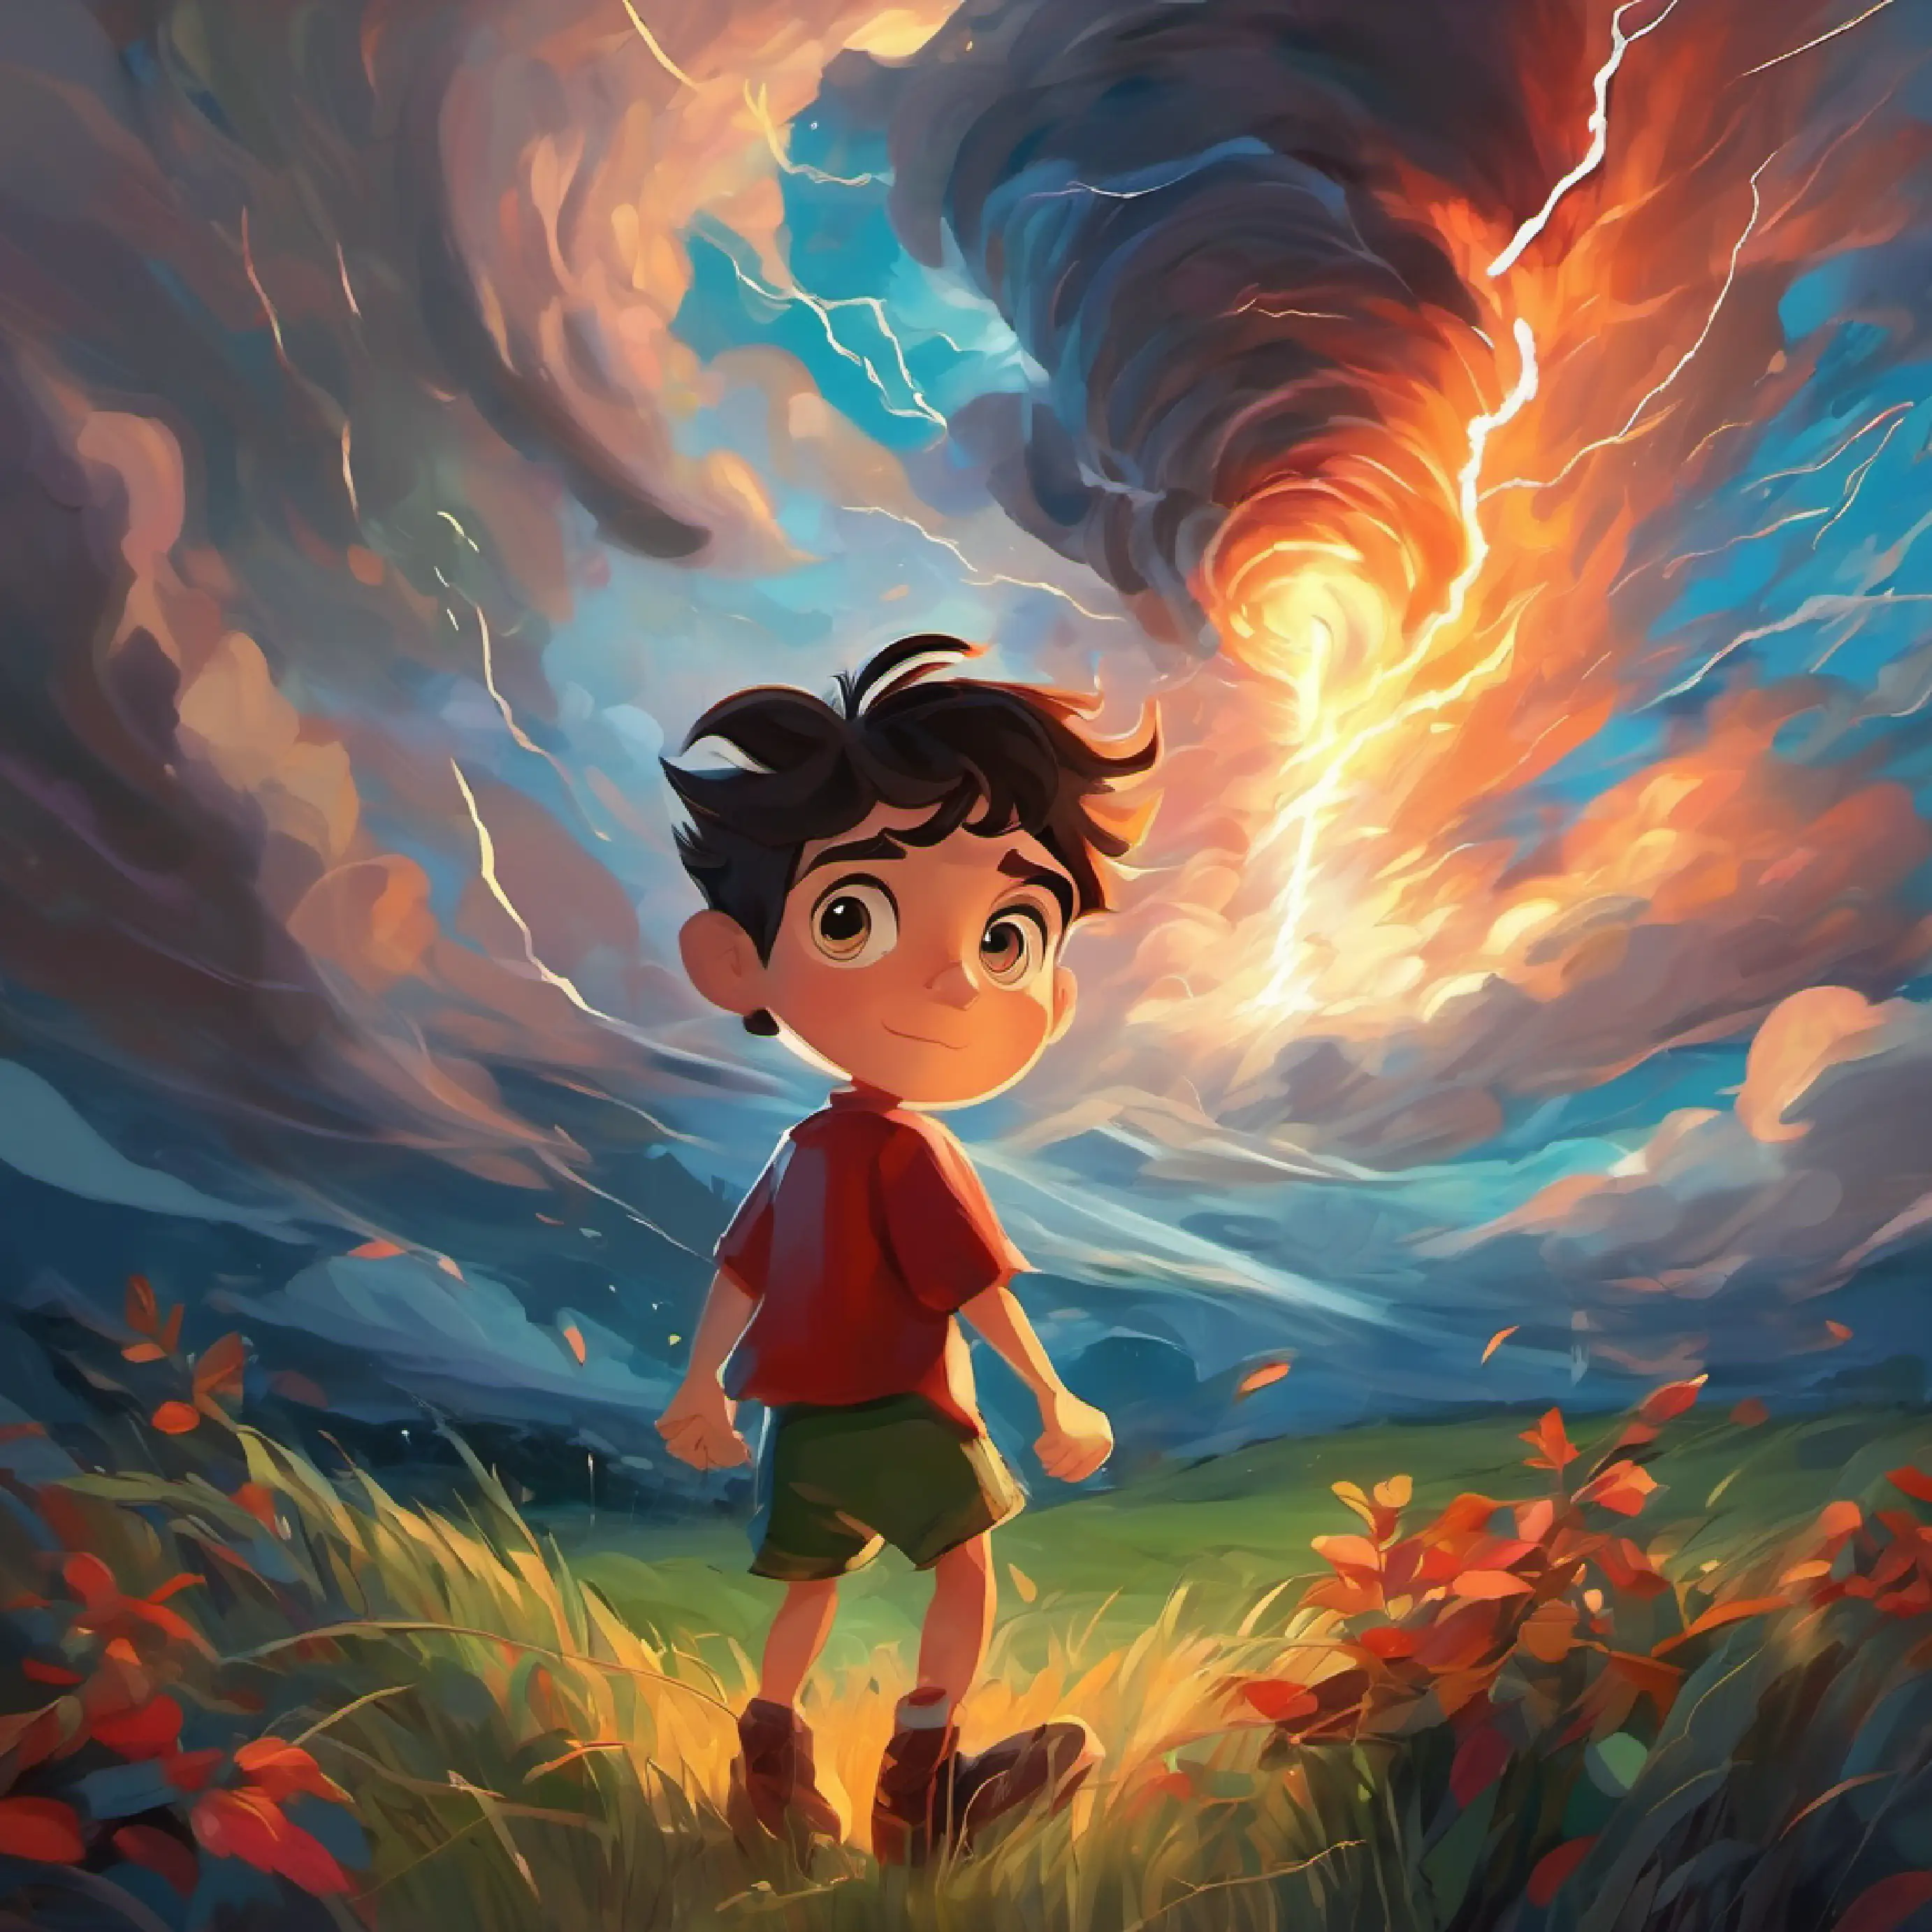 Curious boy, bright eyes, wild imagination, fearless spirit experiences lightning and thunder inside the tornado.